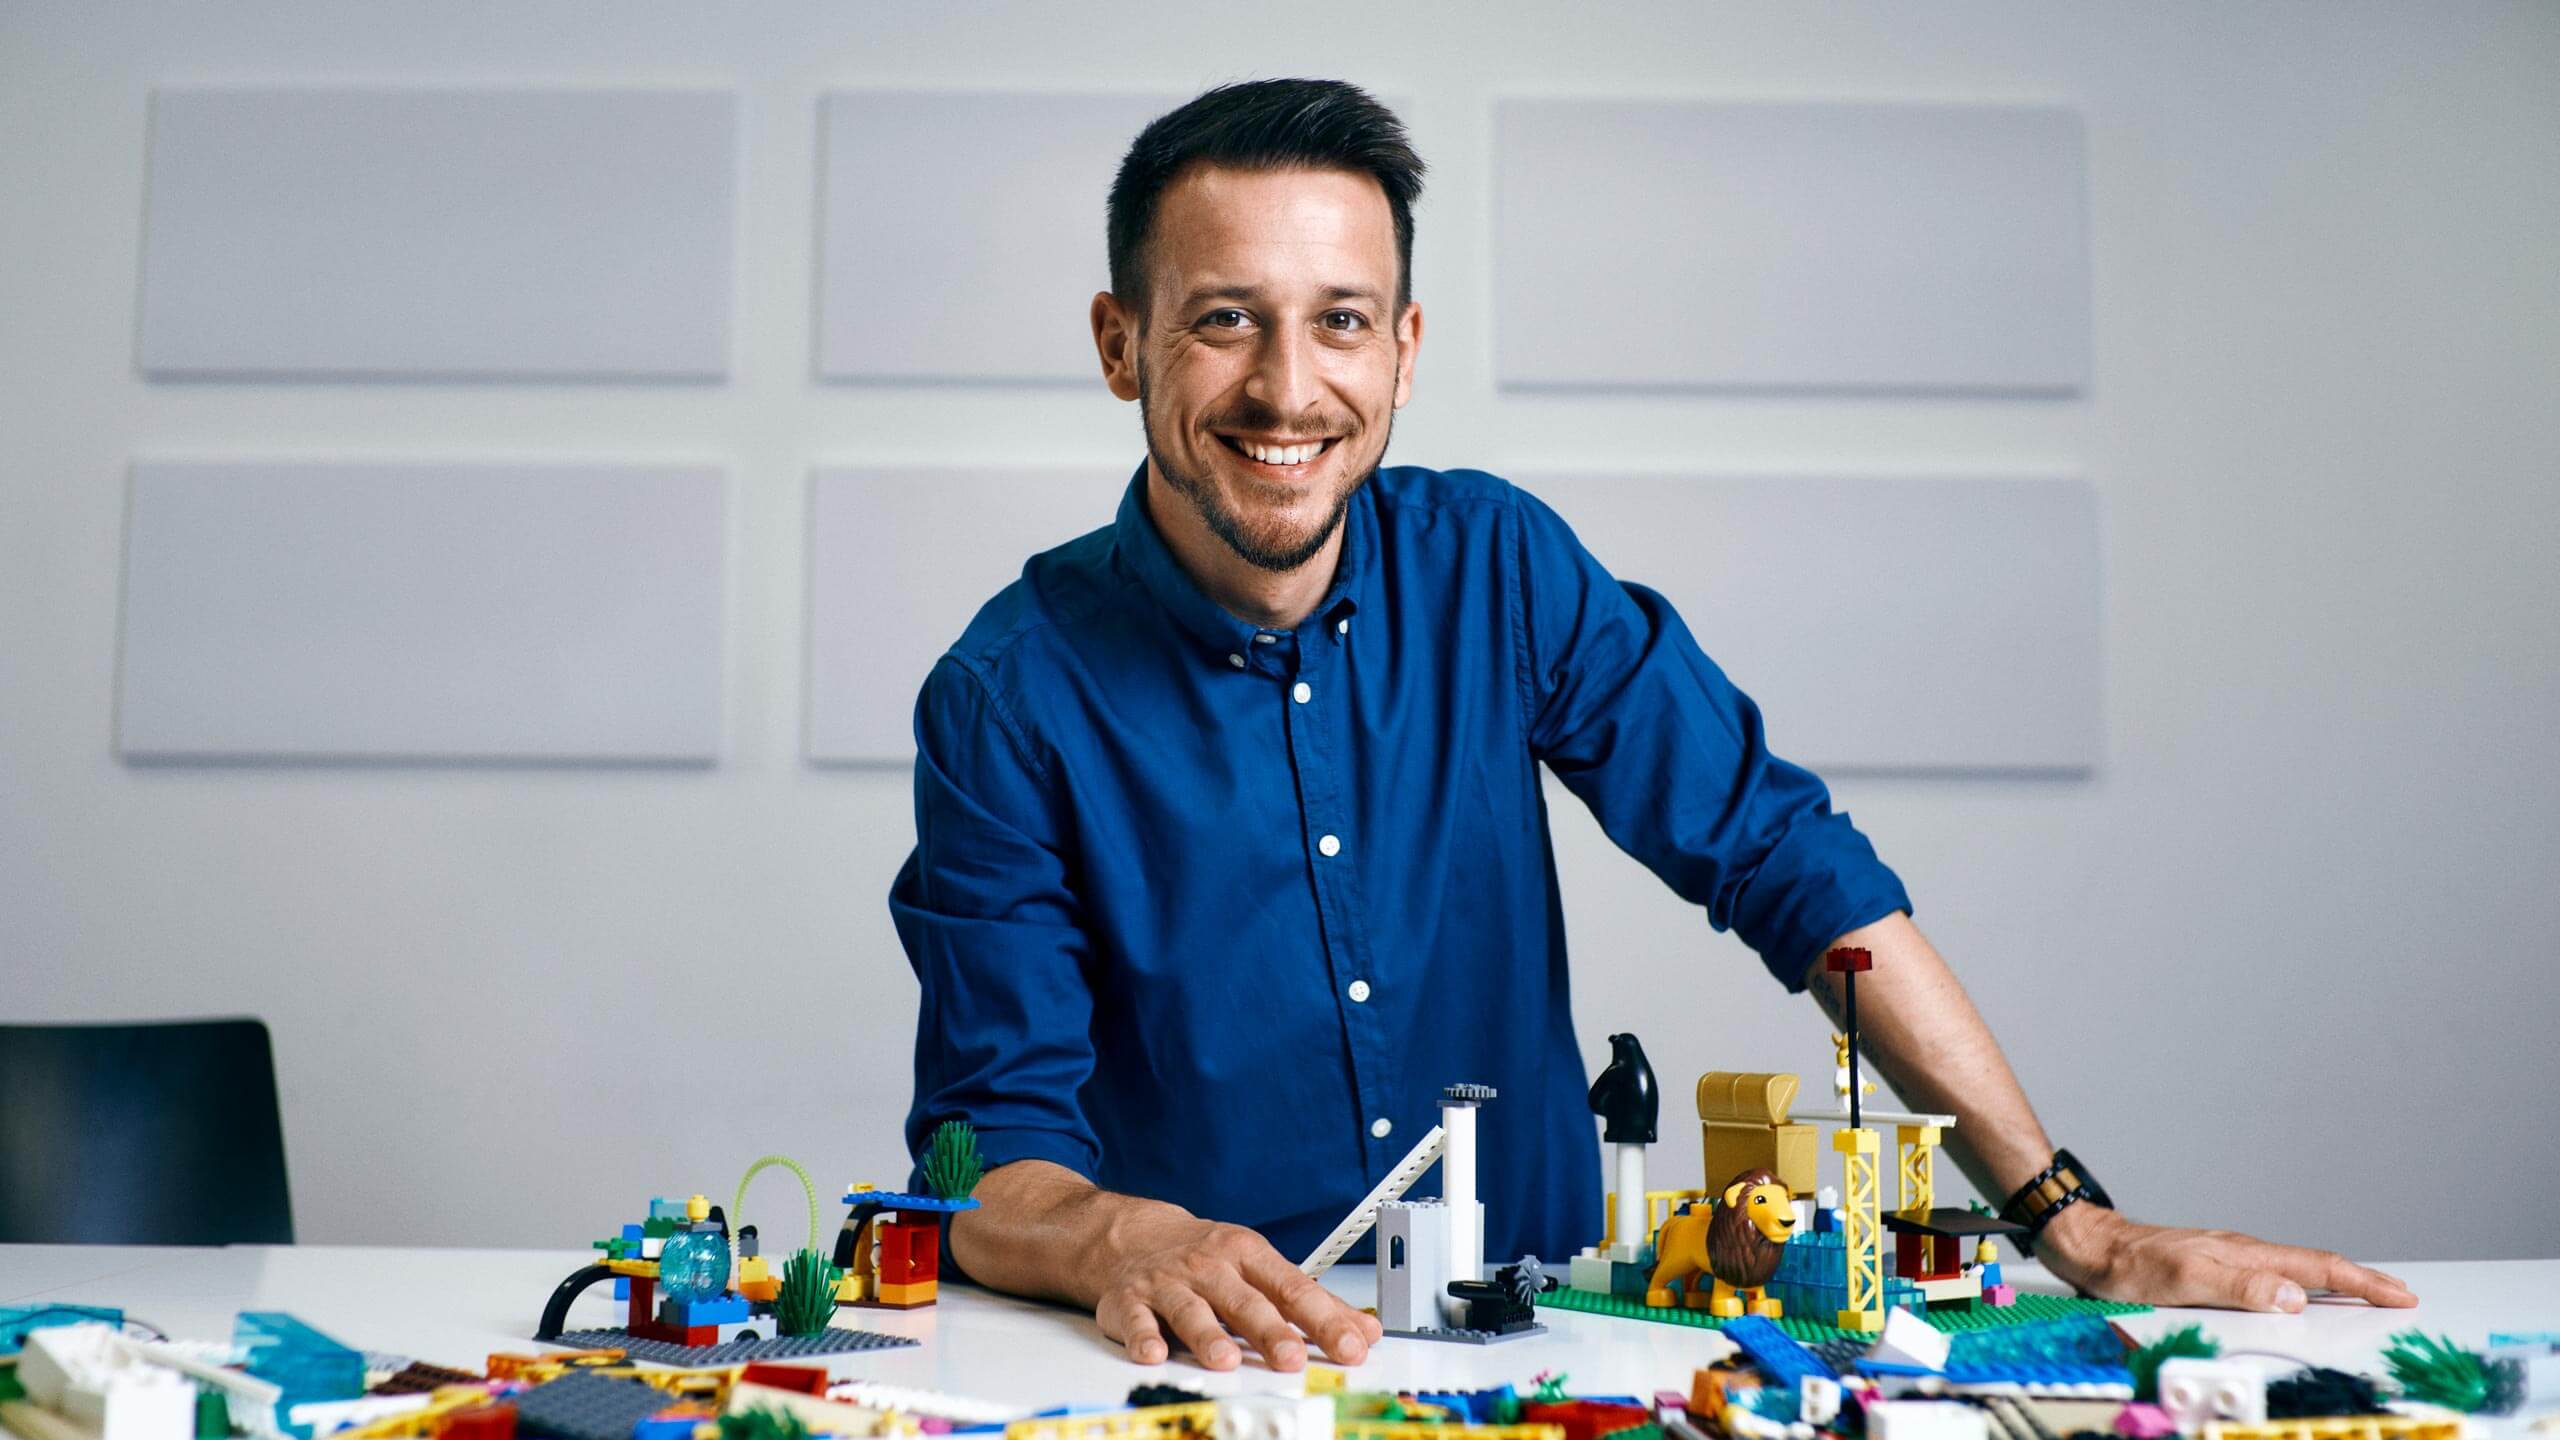 Sven Golob at table with Lego